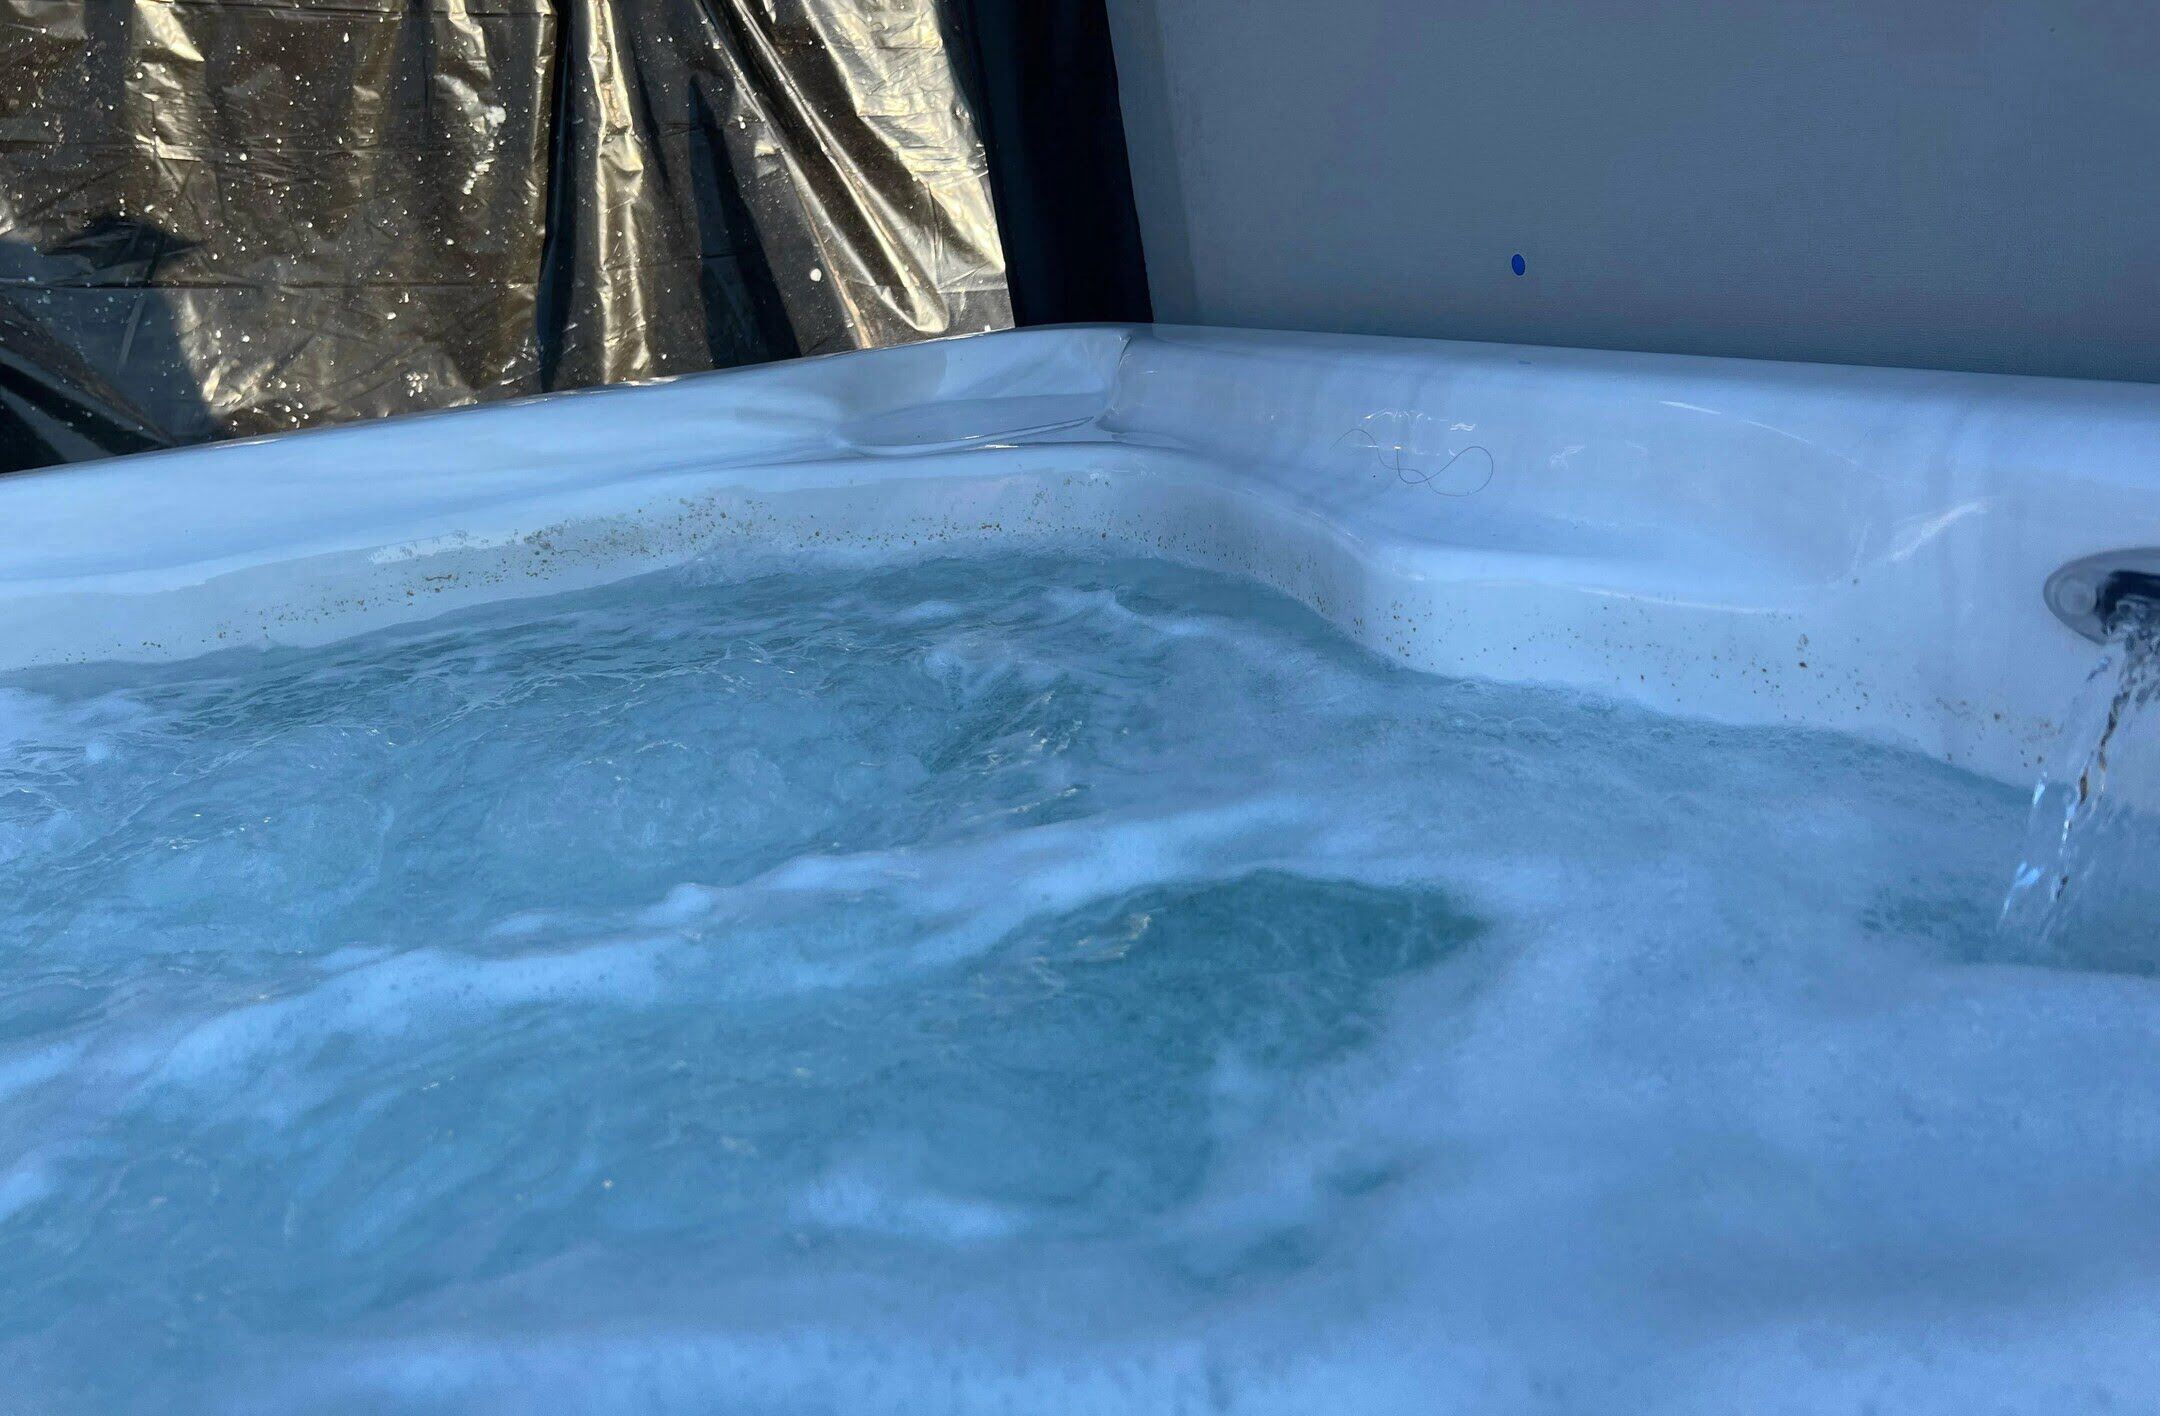 How To Get Soap Out Of Hot Tub